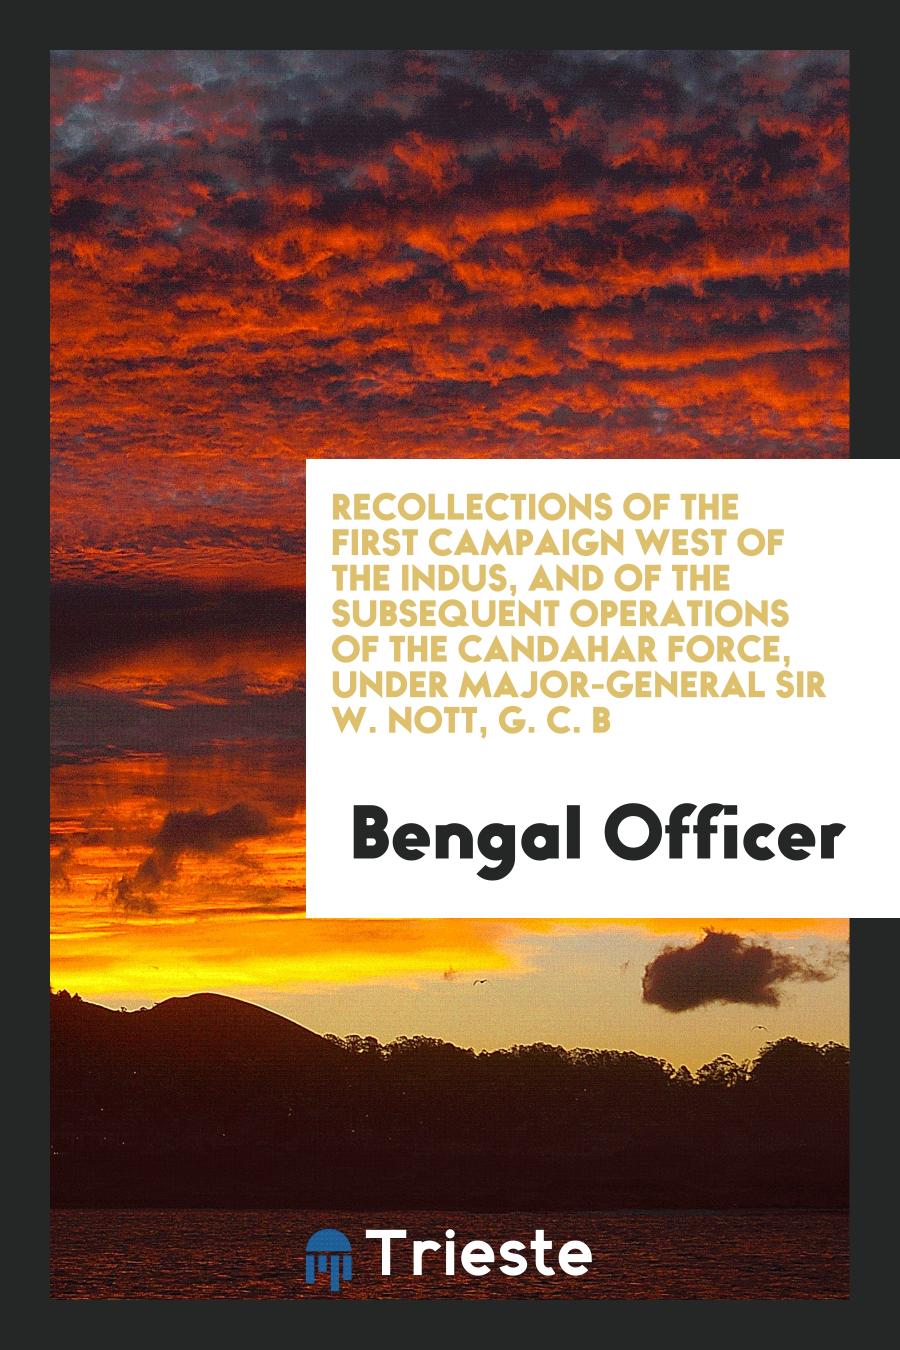 Recollections of the First Campaign West of the Indus, and of the Subsequent Operations of the Candahar Force, under Major-General Sir W. Nott, G. C. B